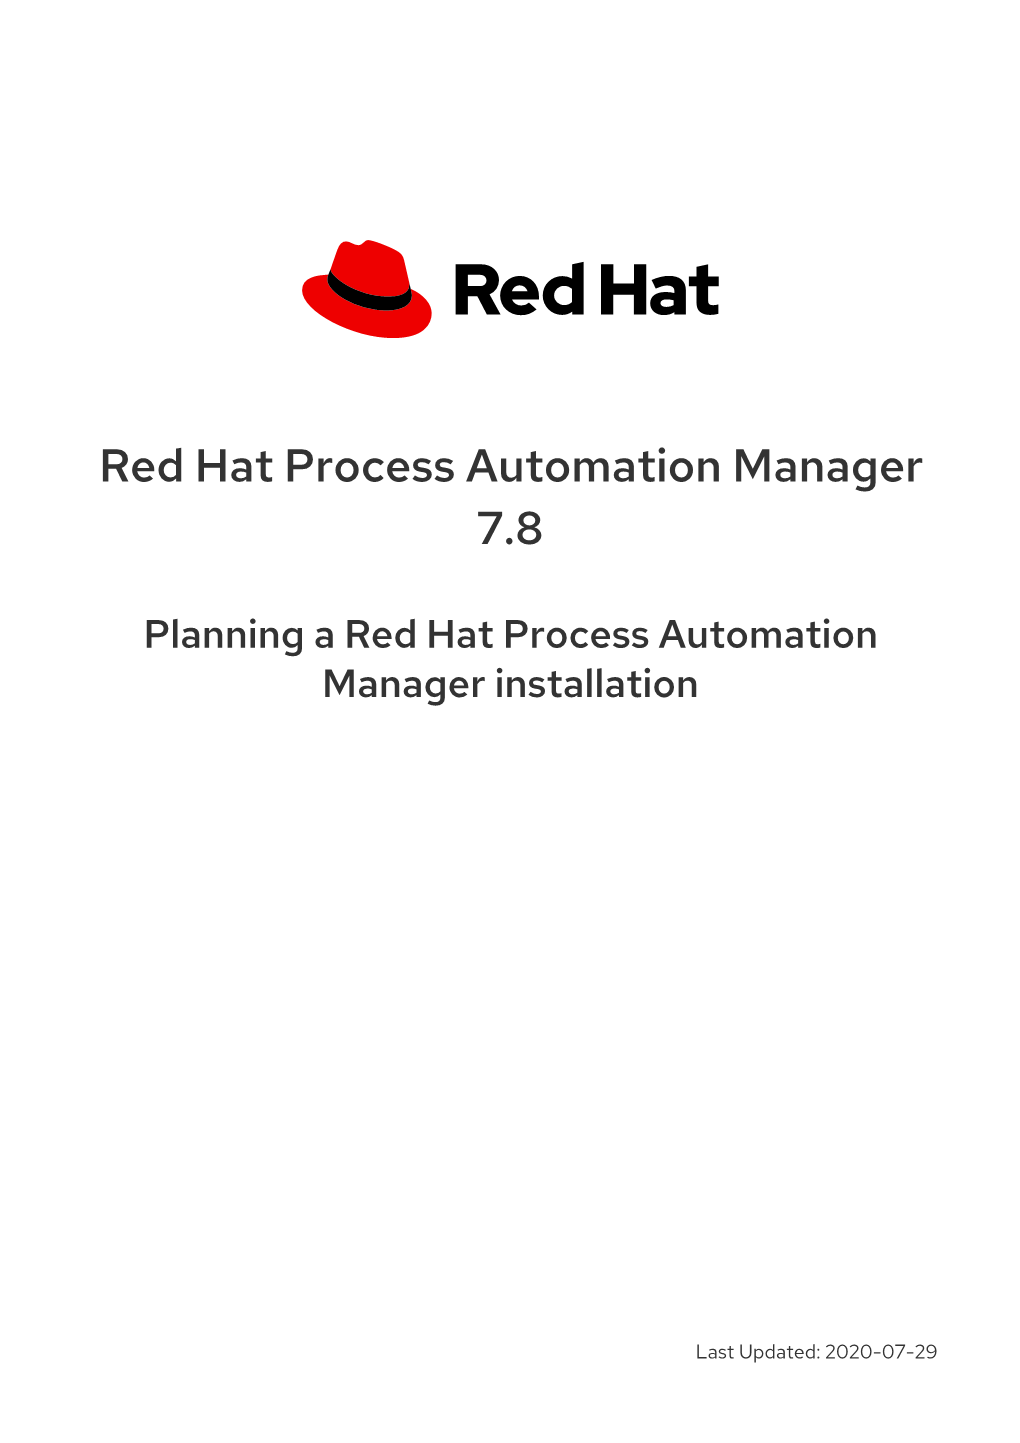 Red Hat Process Automation Manager 7.8